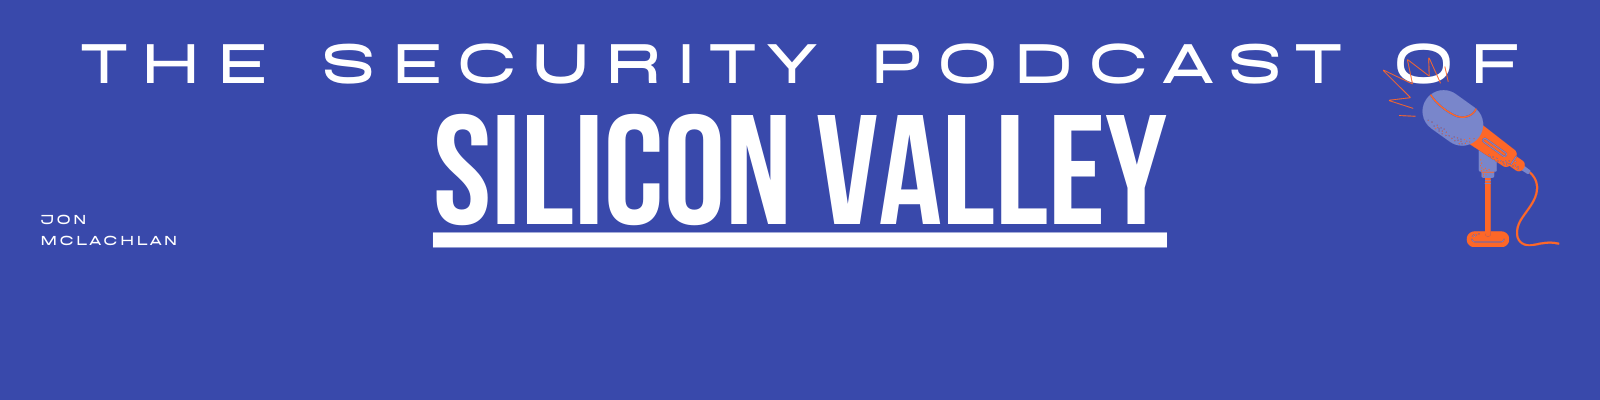 The Security Podcast of Silicon Valley